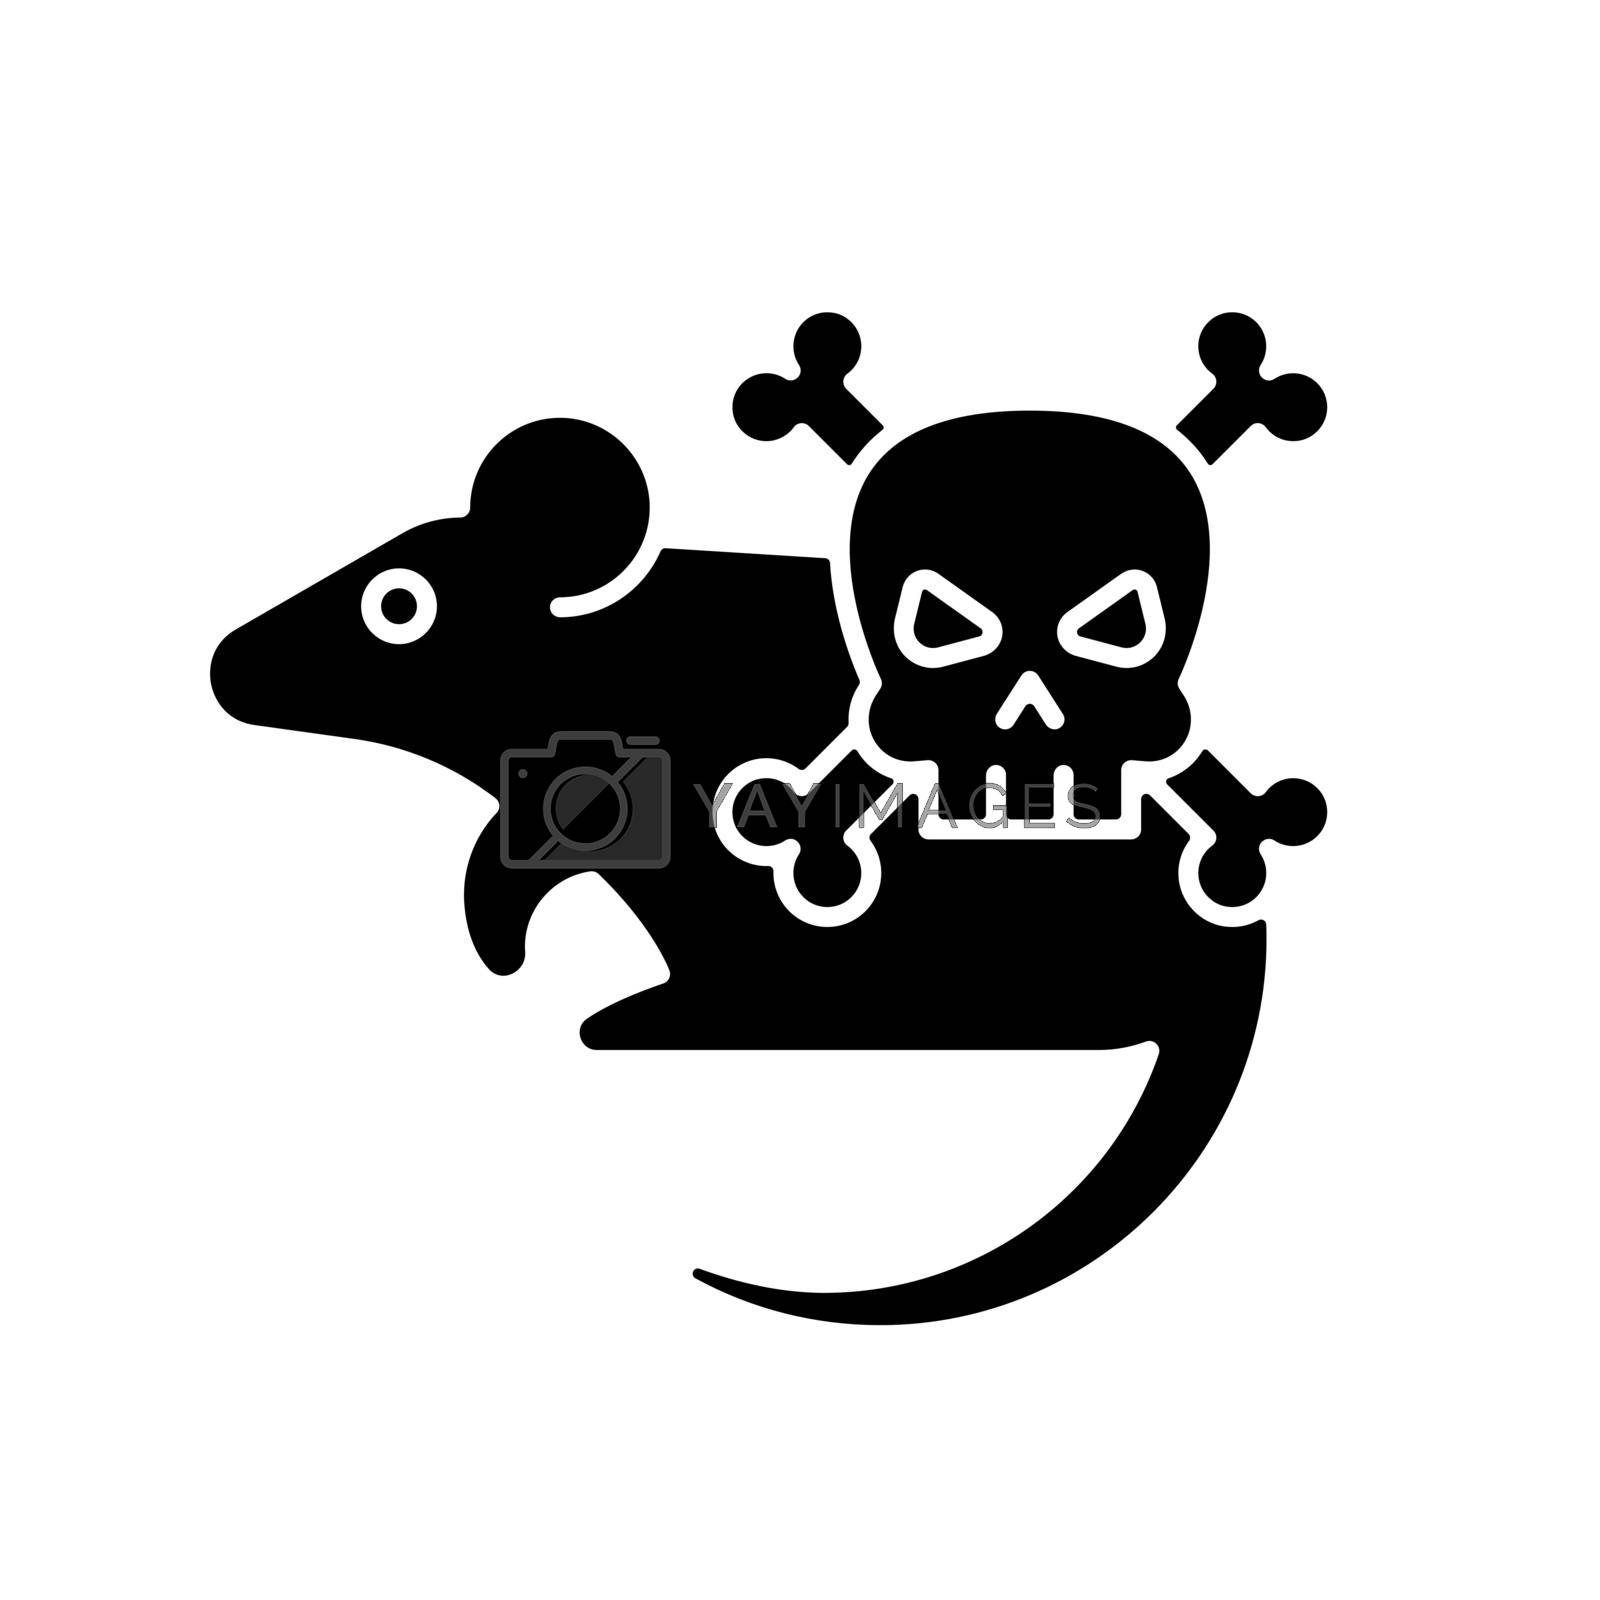 Animals black glyph icon. Mice and rats. Small animals that carry dangerous diseases. Health care problem. Zoonotic disease spread. Silhouette symbol on white space. Vector isolated illustration